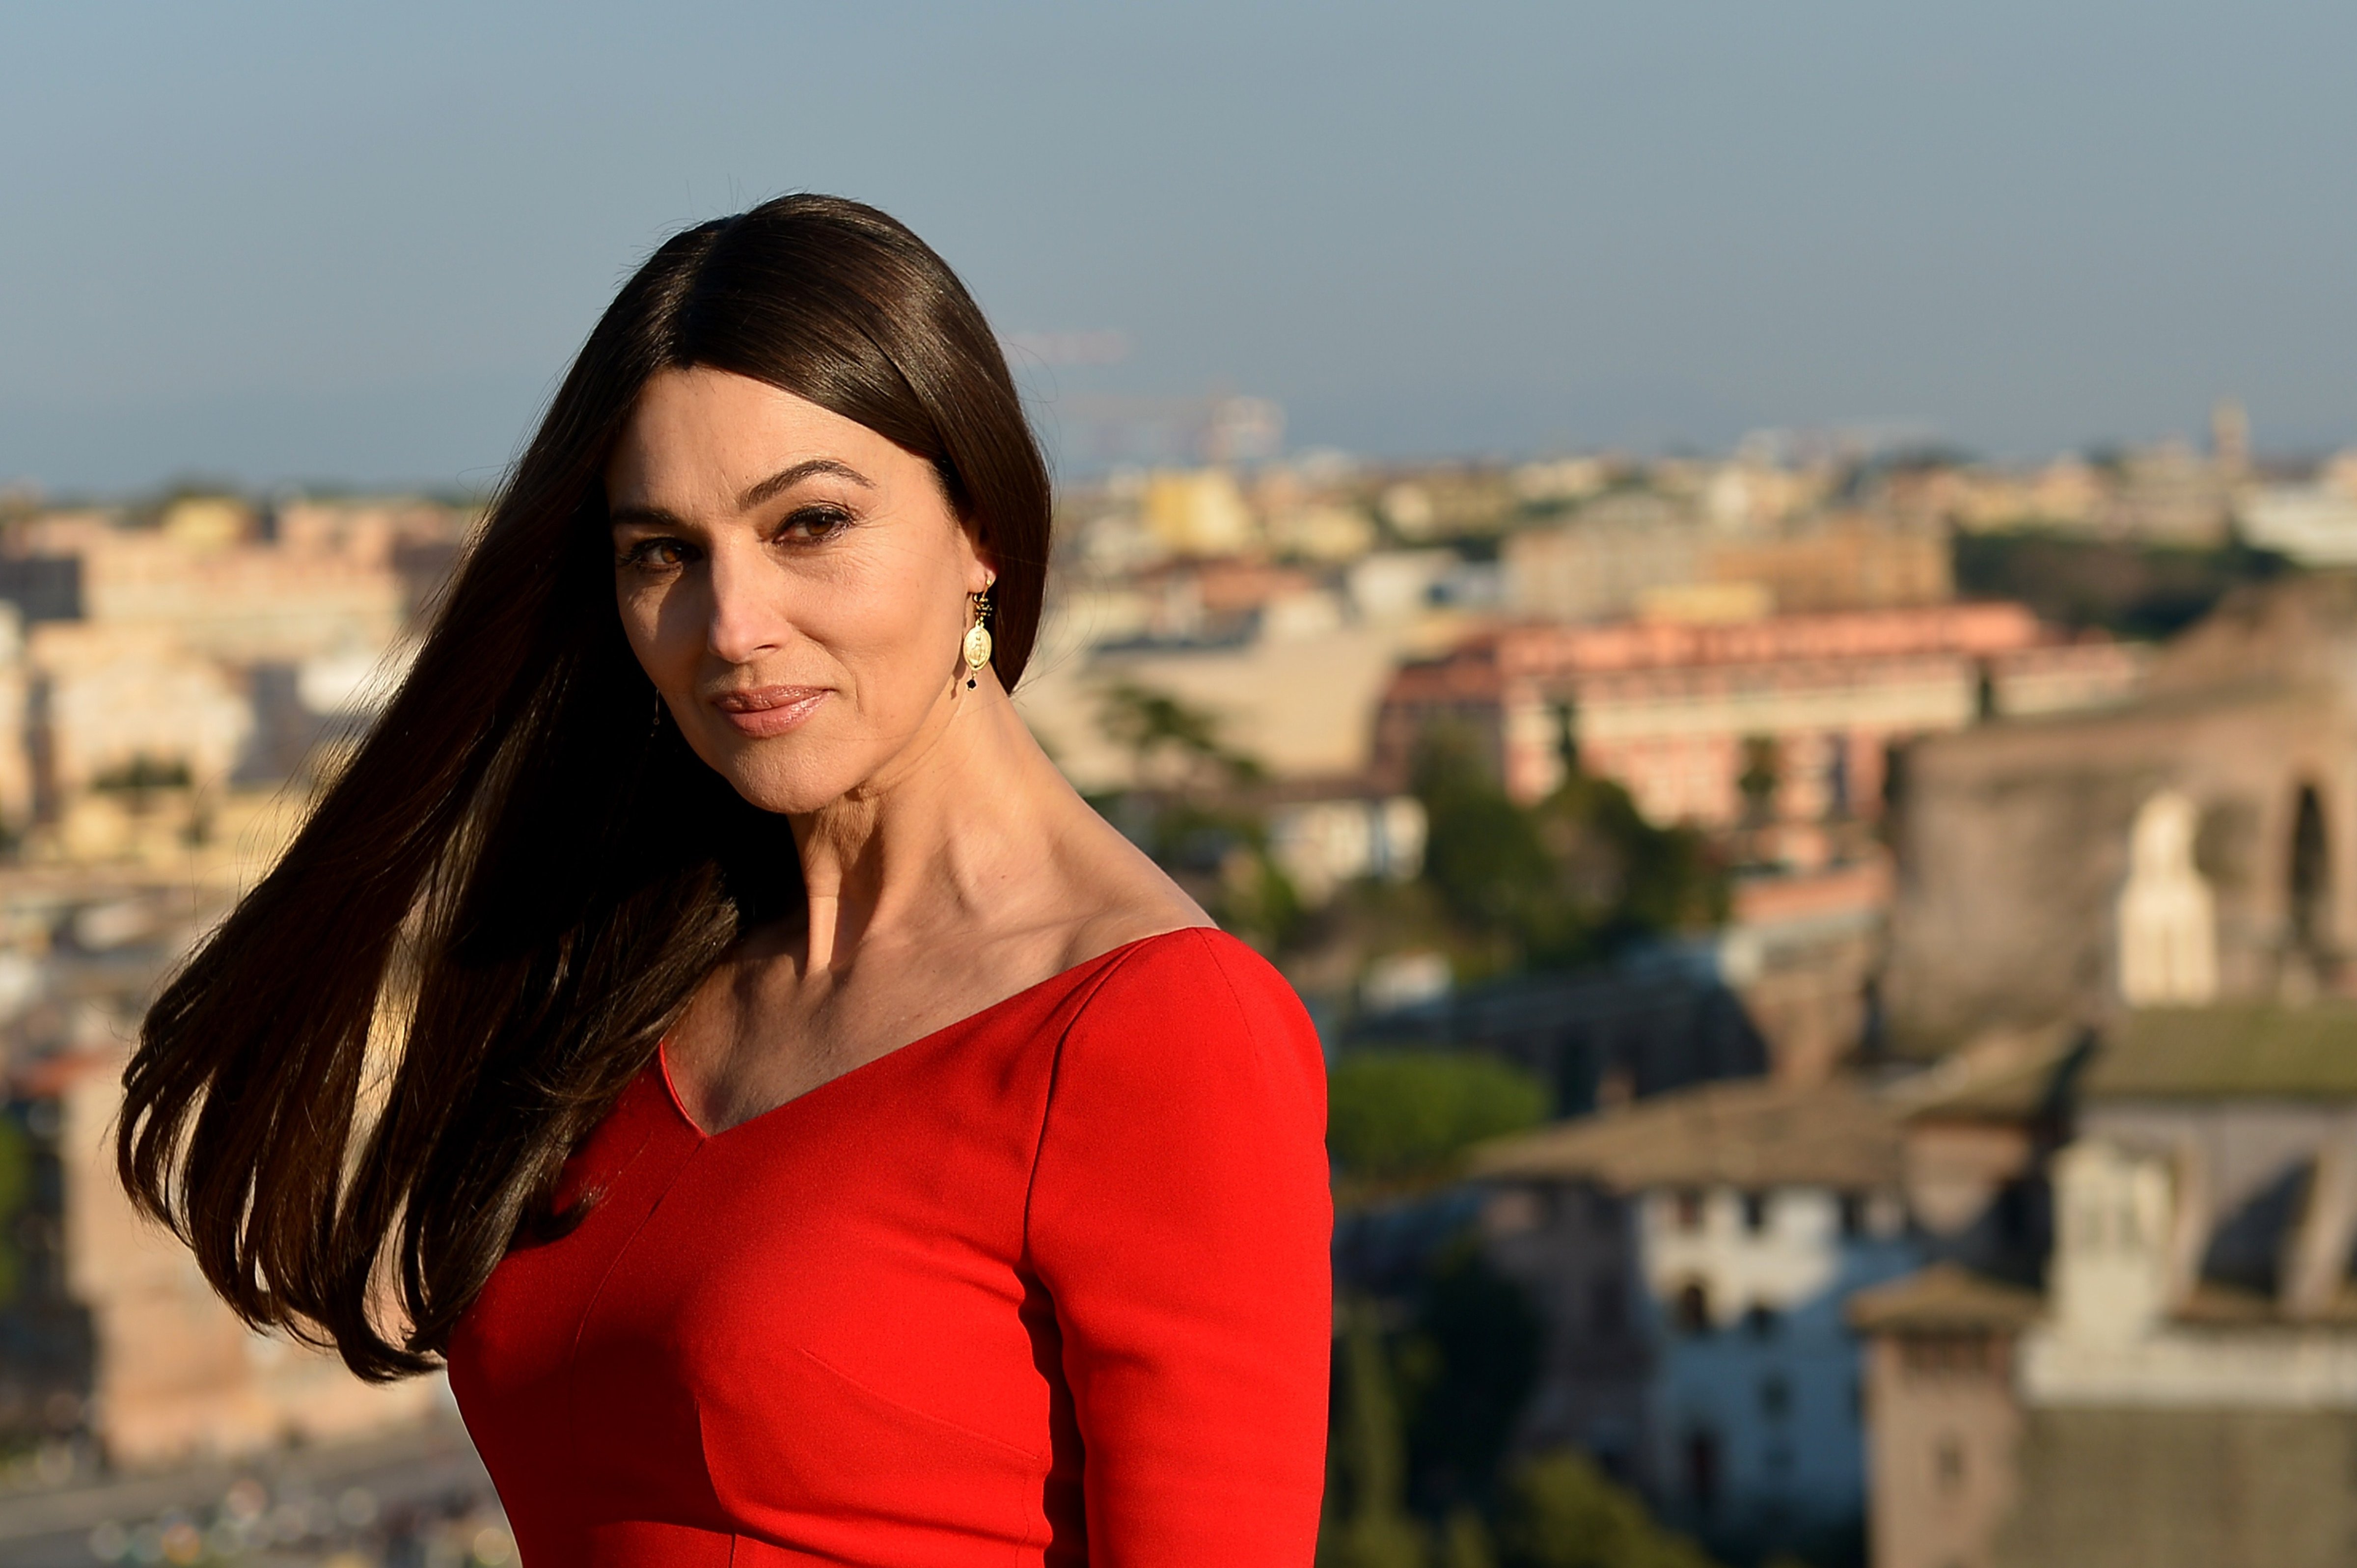 Italian actress Monica Bellucci poses during a photocall to promote the 24th James Bond film 'Spectre' in Rome, on Feb. 18, 2015. (Tiziana Fabi—AFP/Getty Images)